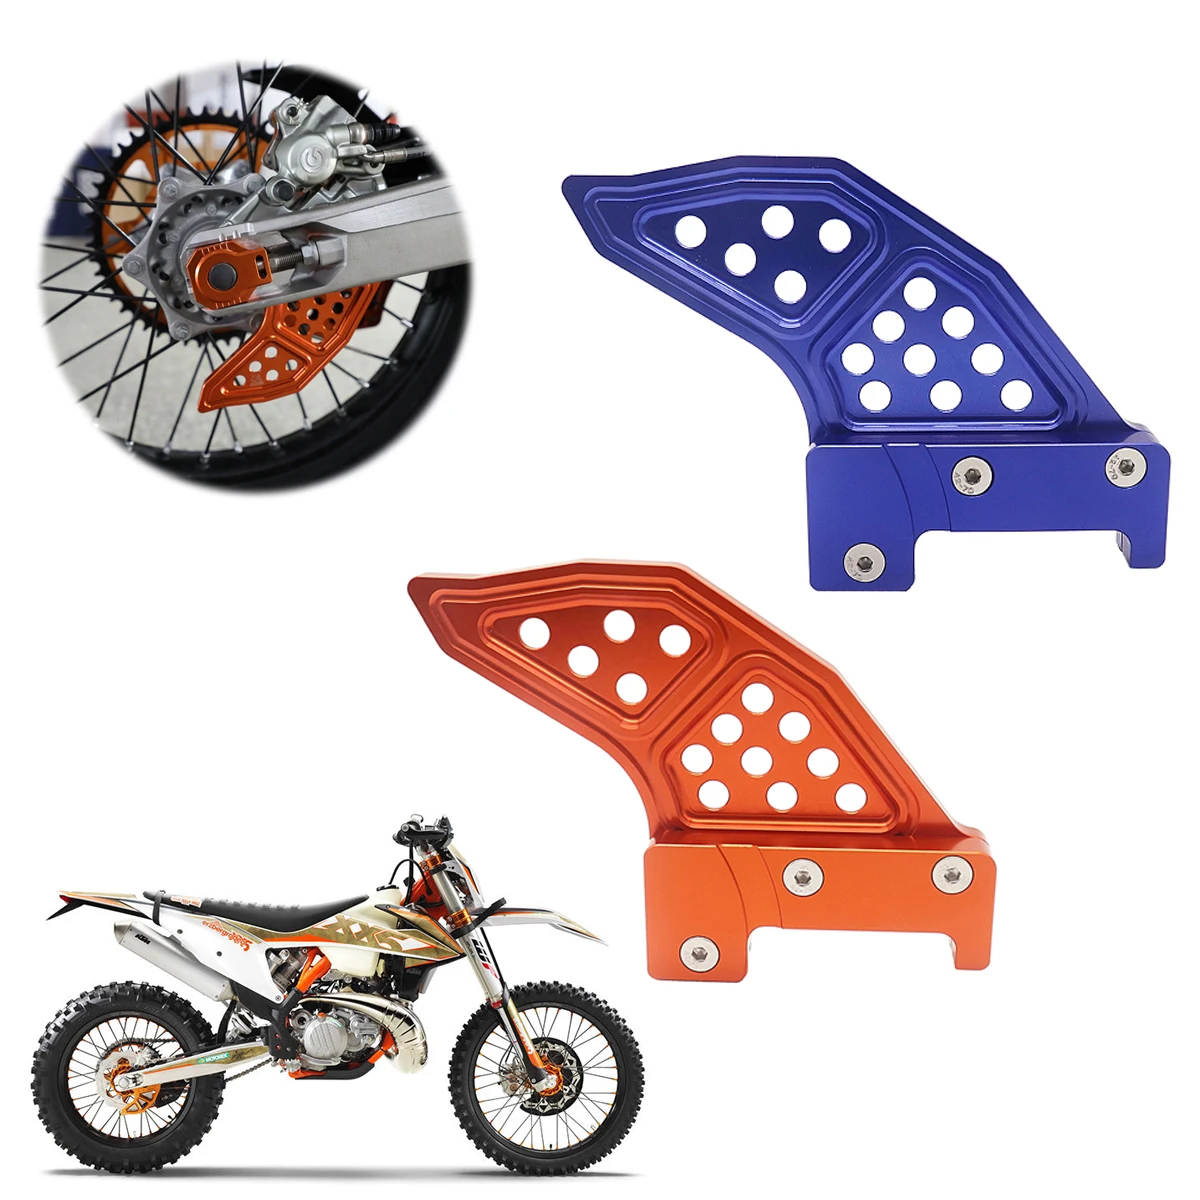 

CNC Motorcycle Rear Brake Disc Guard Protector For KTM125-530 XCW XCF-W EXC EXC-F SX SXF XC XCF For Husqvarna TC FC TE 2015-2018